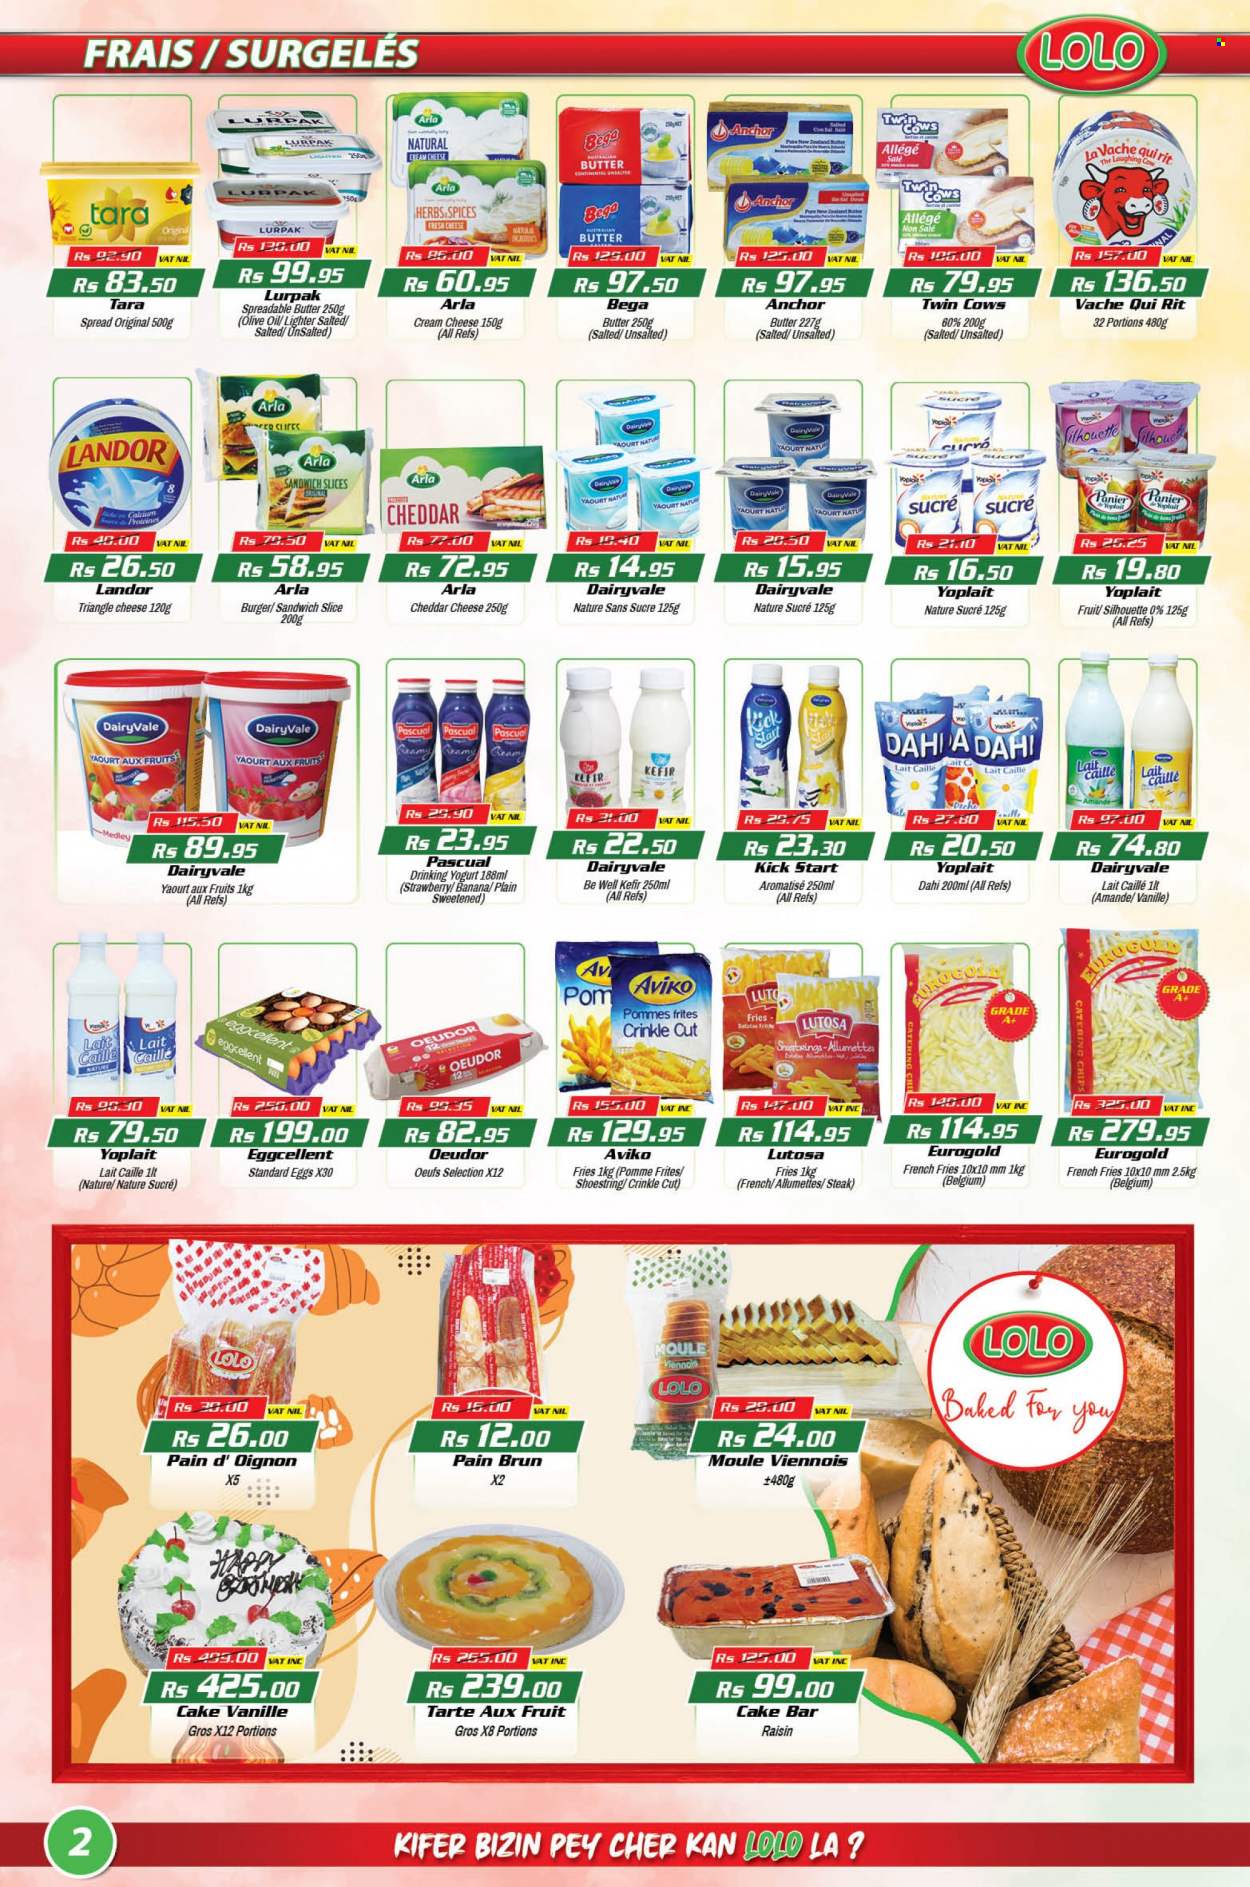 thumbnail - LOLO Hyper Catalogue - 25.11.2022 - 14.12.2022 - Sales products - cake, sweet potato, sandwich, hamburger, Continental, sandwich slices, cheese, The Laughing Cow, Arla, yoghurt, Yoplait, kefir, eggs, butter, Anchor, spreadable butter, potato fries, french fries, chips, herbs, olive oil, oil, calcium, steak. Page 2.